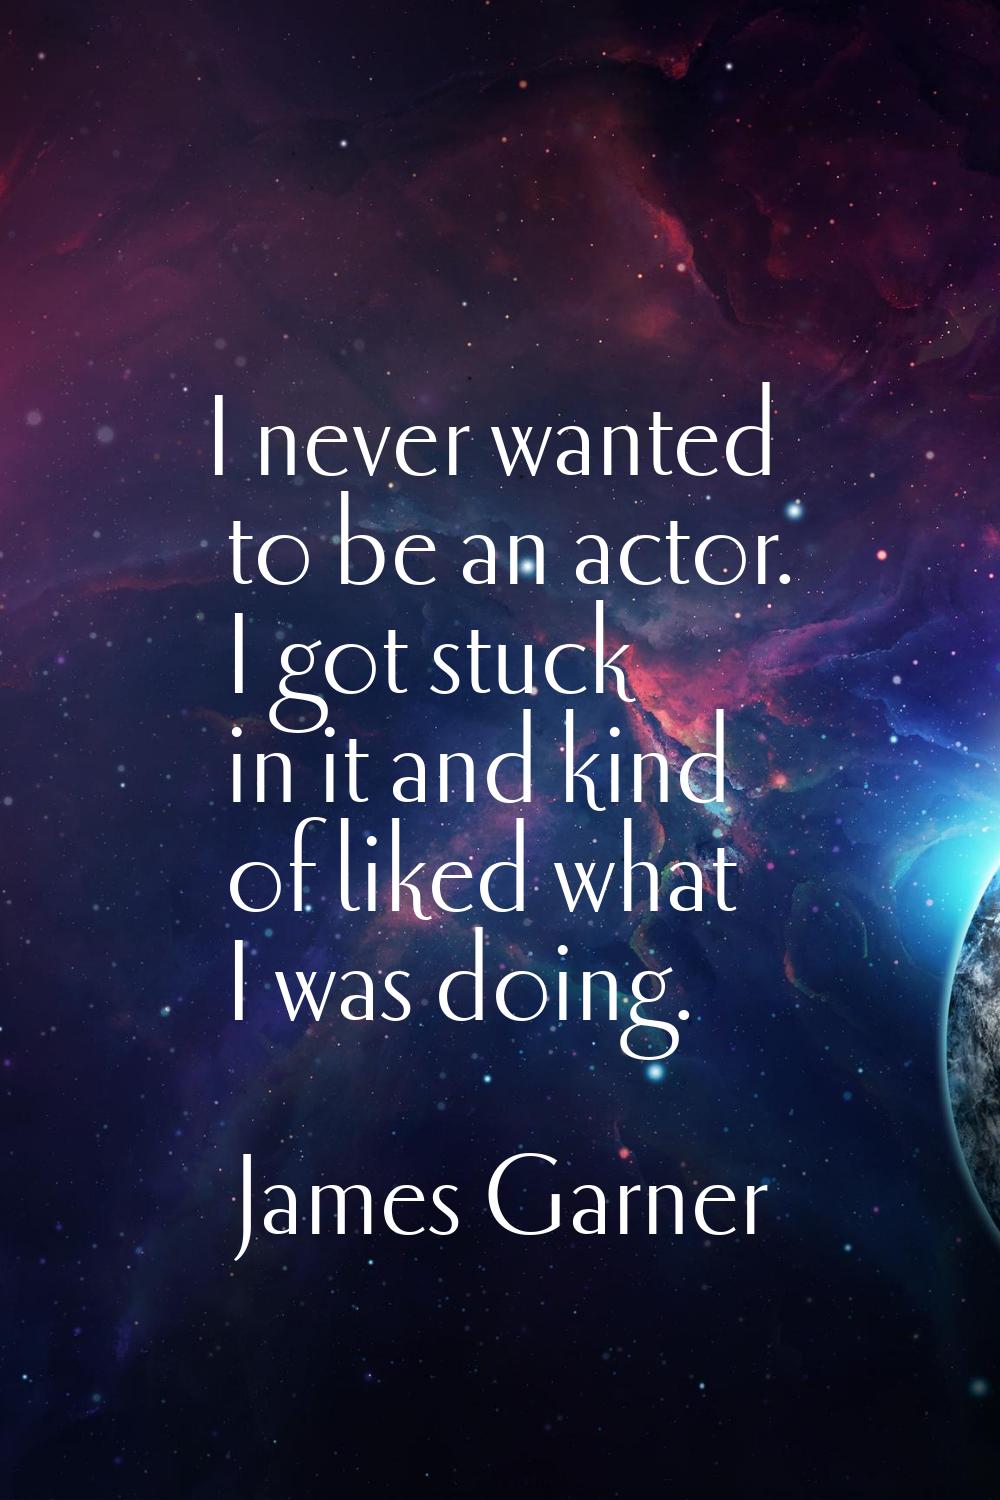 I never wanted to be an actor. I got stuck in it and kind of liked what I was doing.